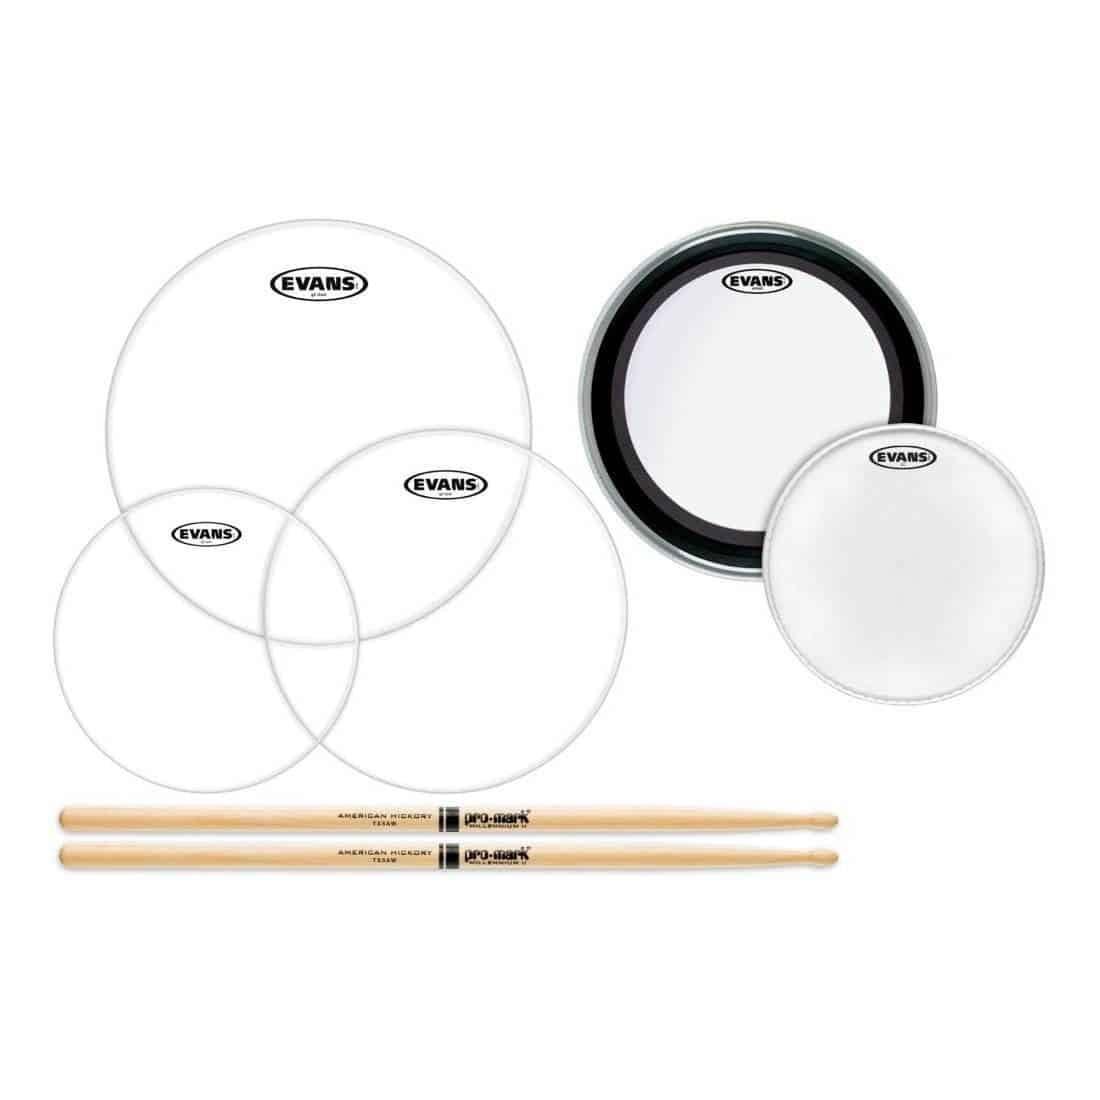 Evans - American Upgrade Pack Fusion 1 W/TX5AW Sticks - Drums & Percussion - Drum Heads by EVANS at Muso's Stuff